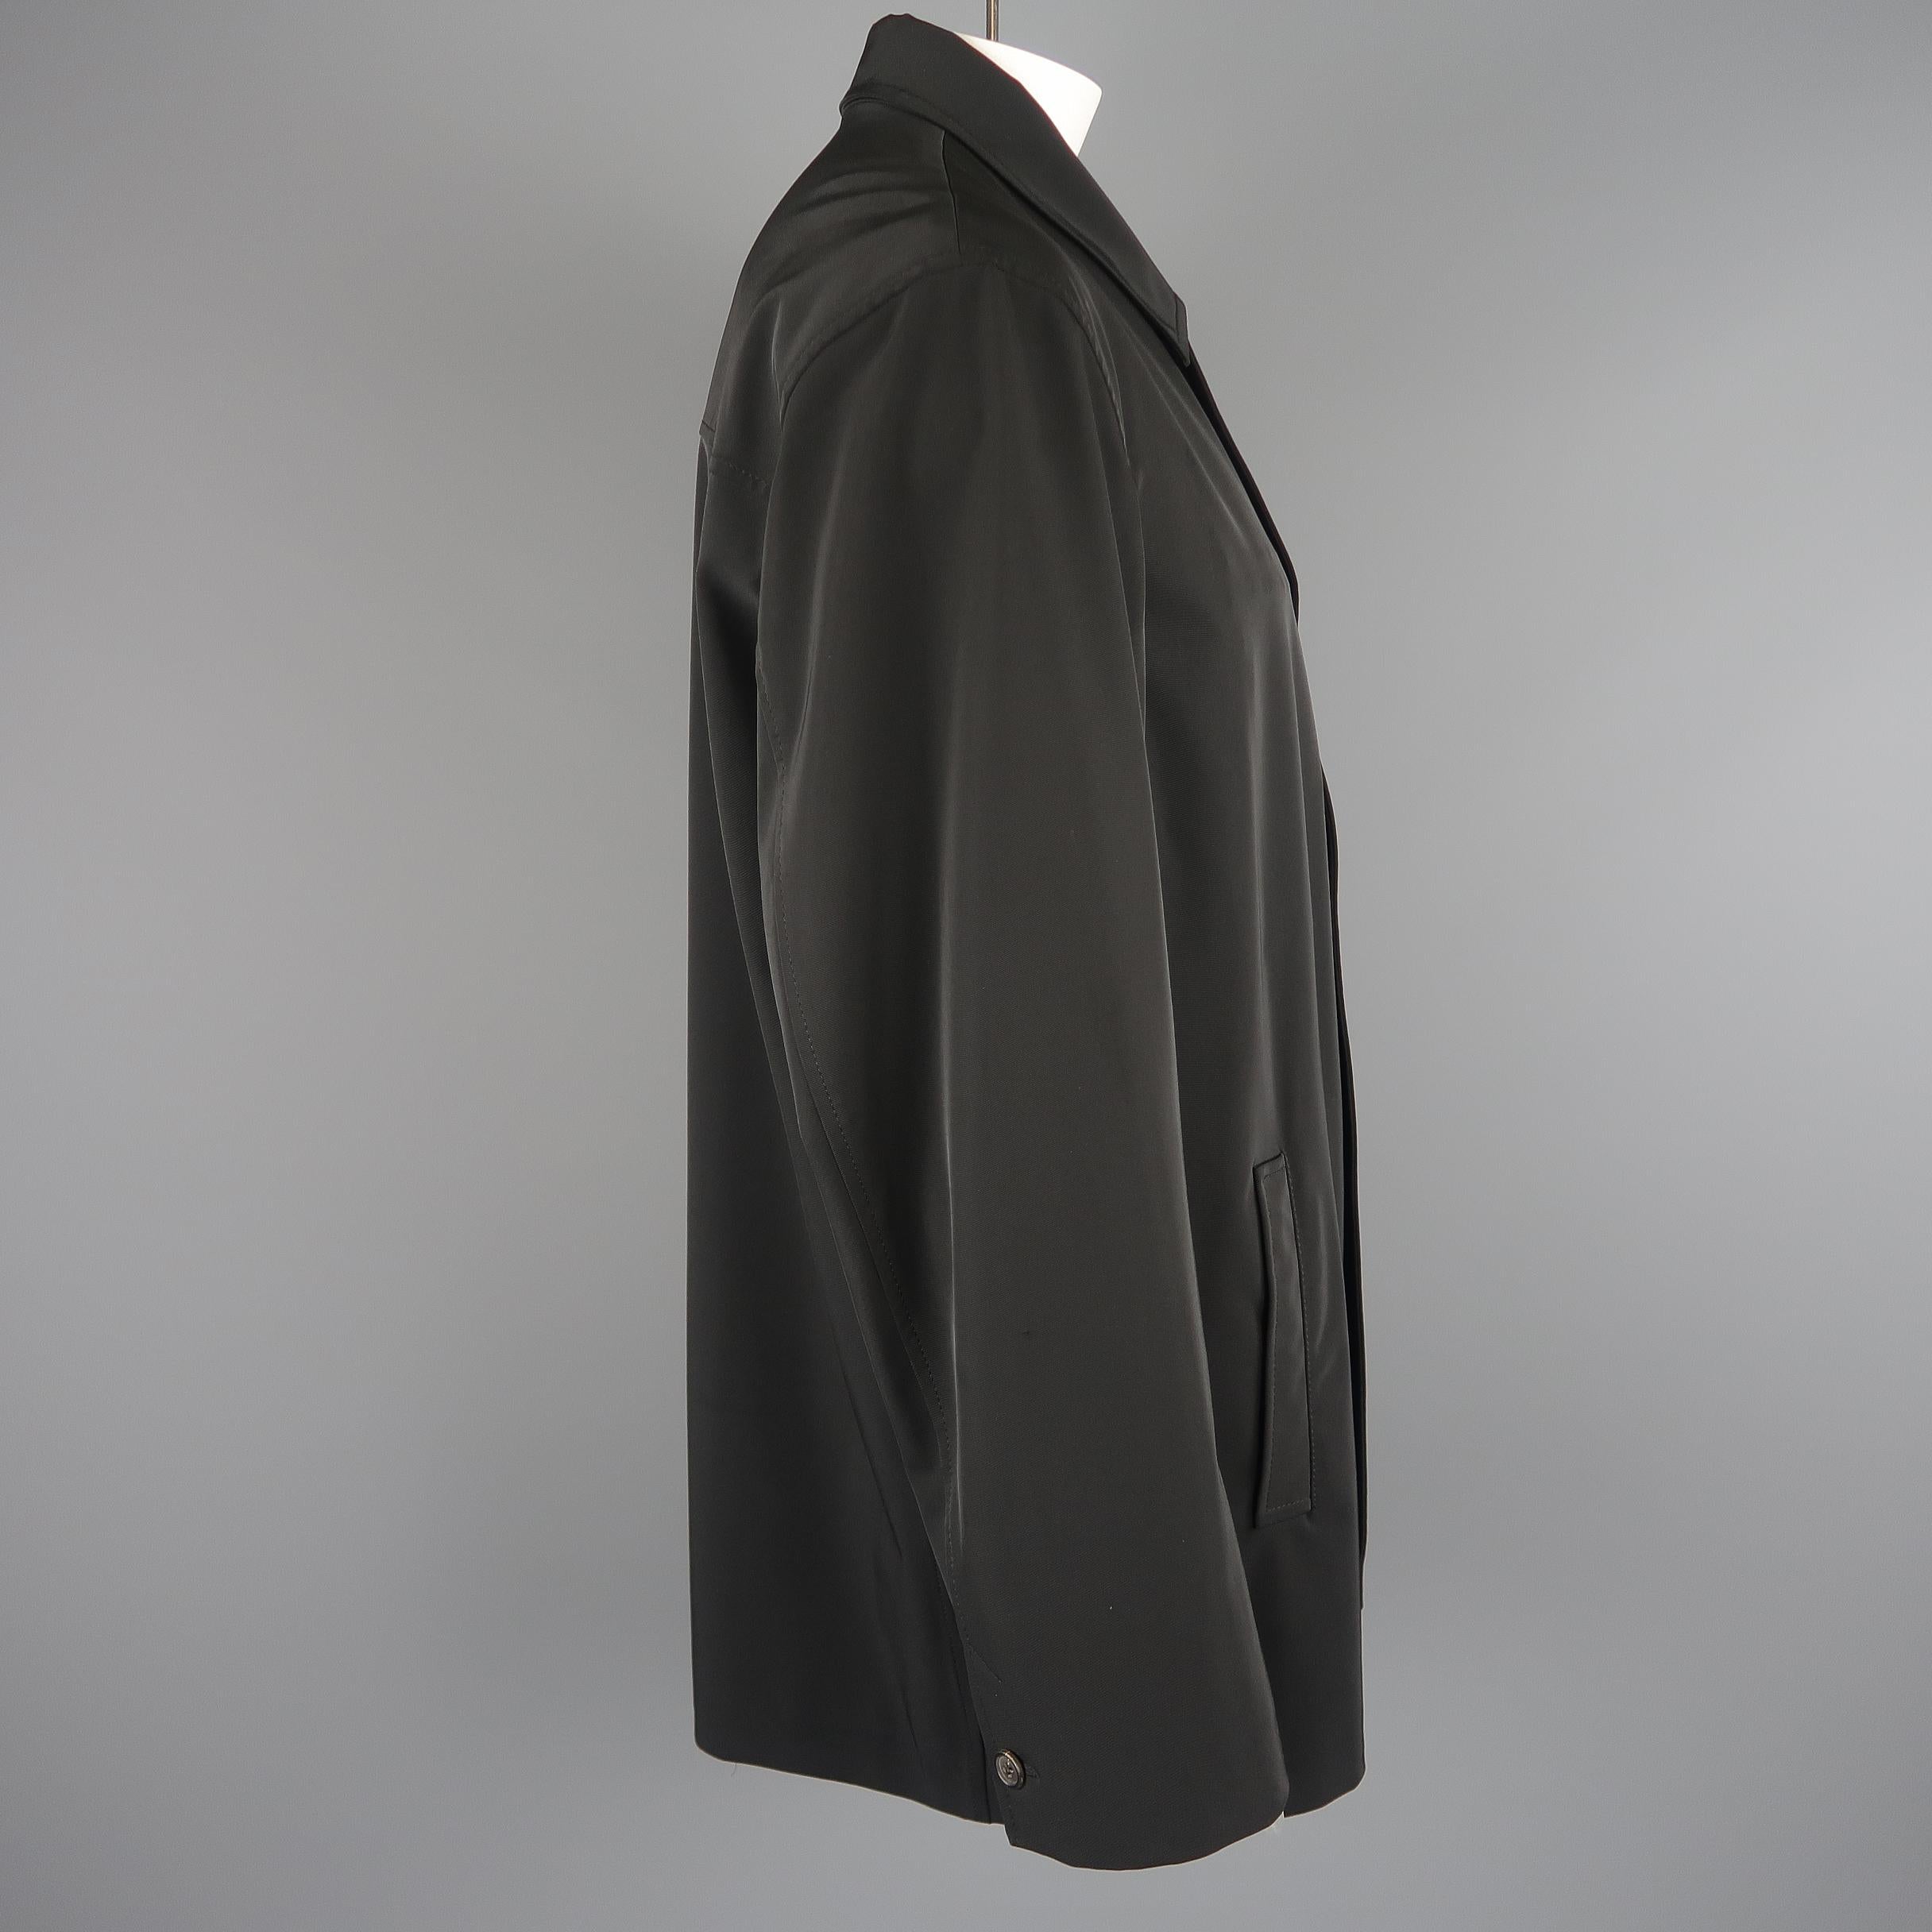 Prada Black Solid Polyester Blend Twill Pointed Collar Coat 4